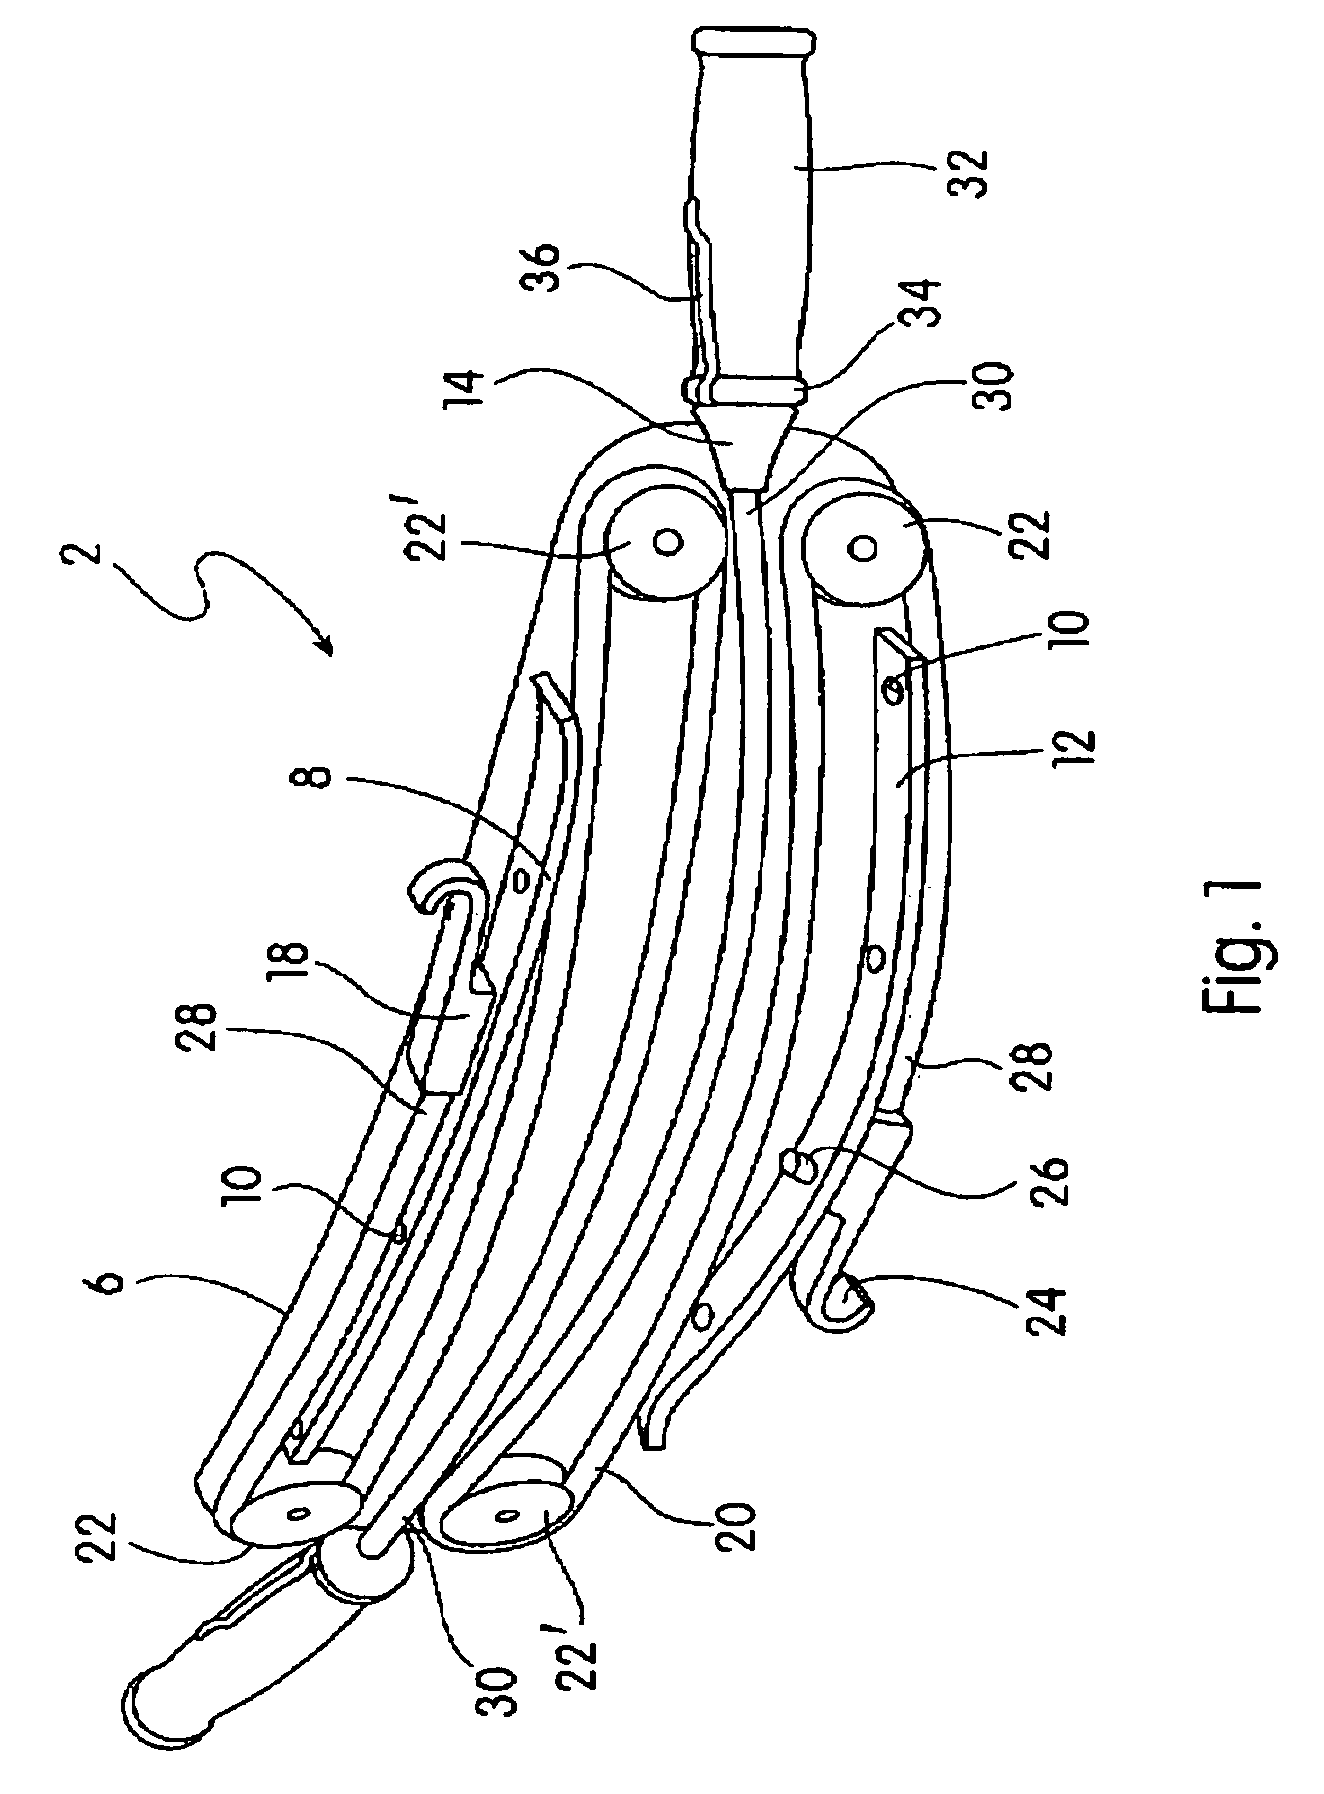 Multi-function exercise device